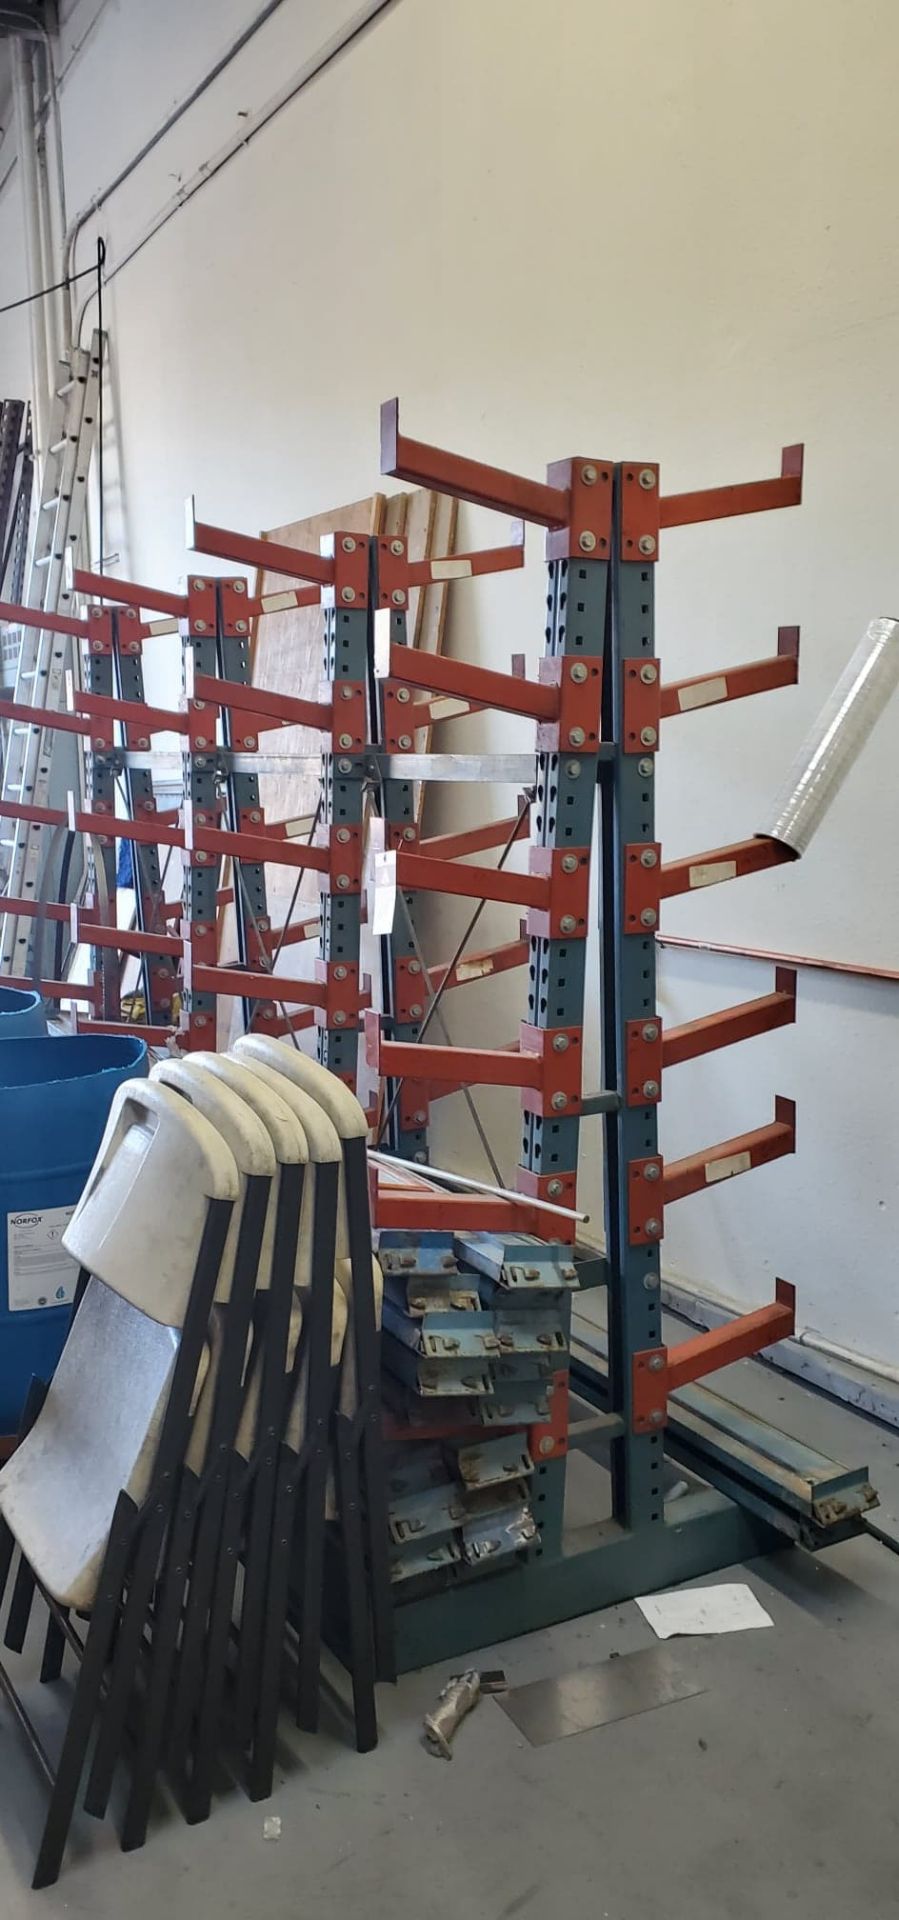 2-Sided Cantilever Material Rack ONLY NO Content (SOLD AS-IS - NO WARRANTY)